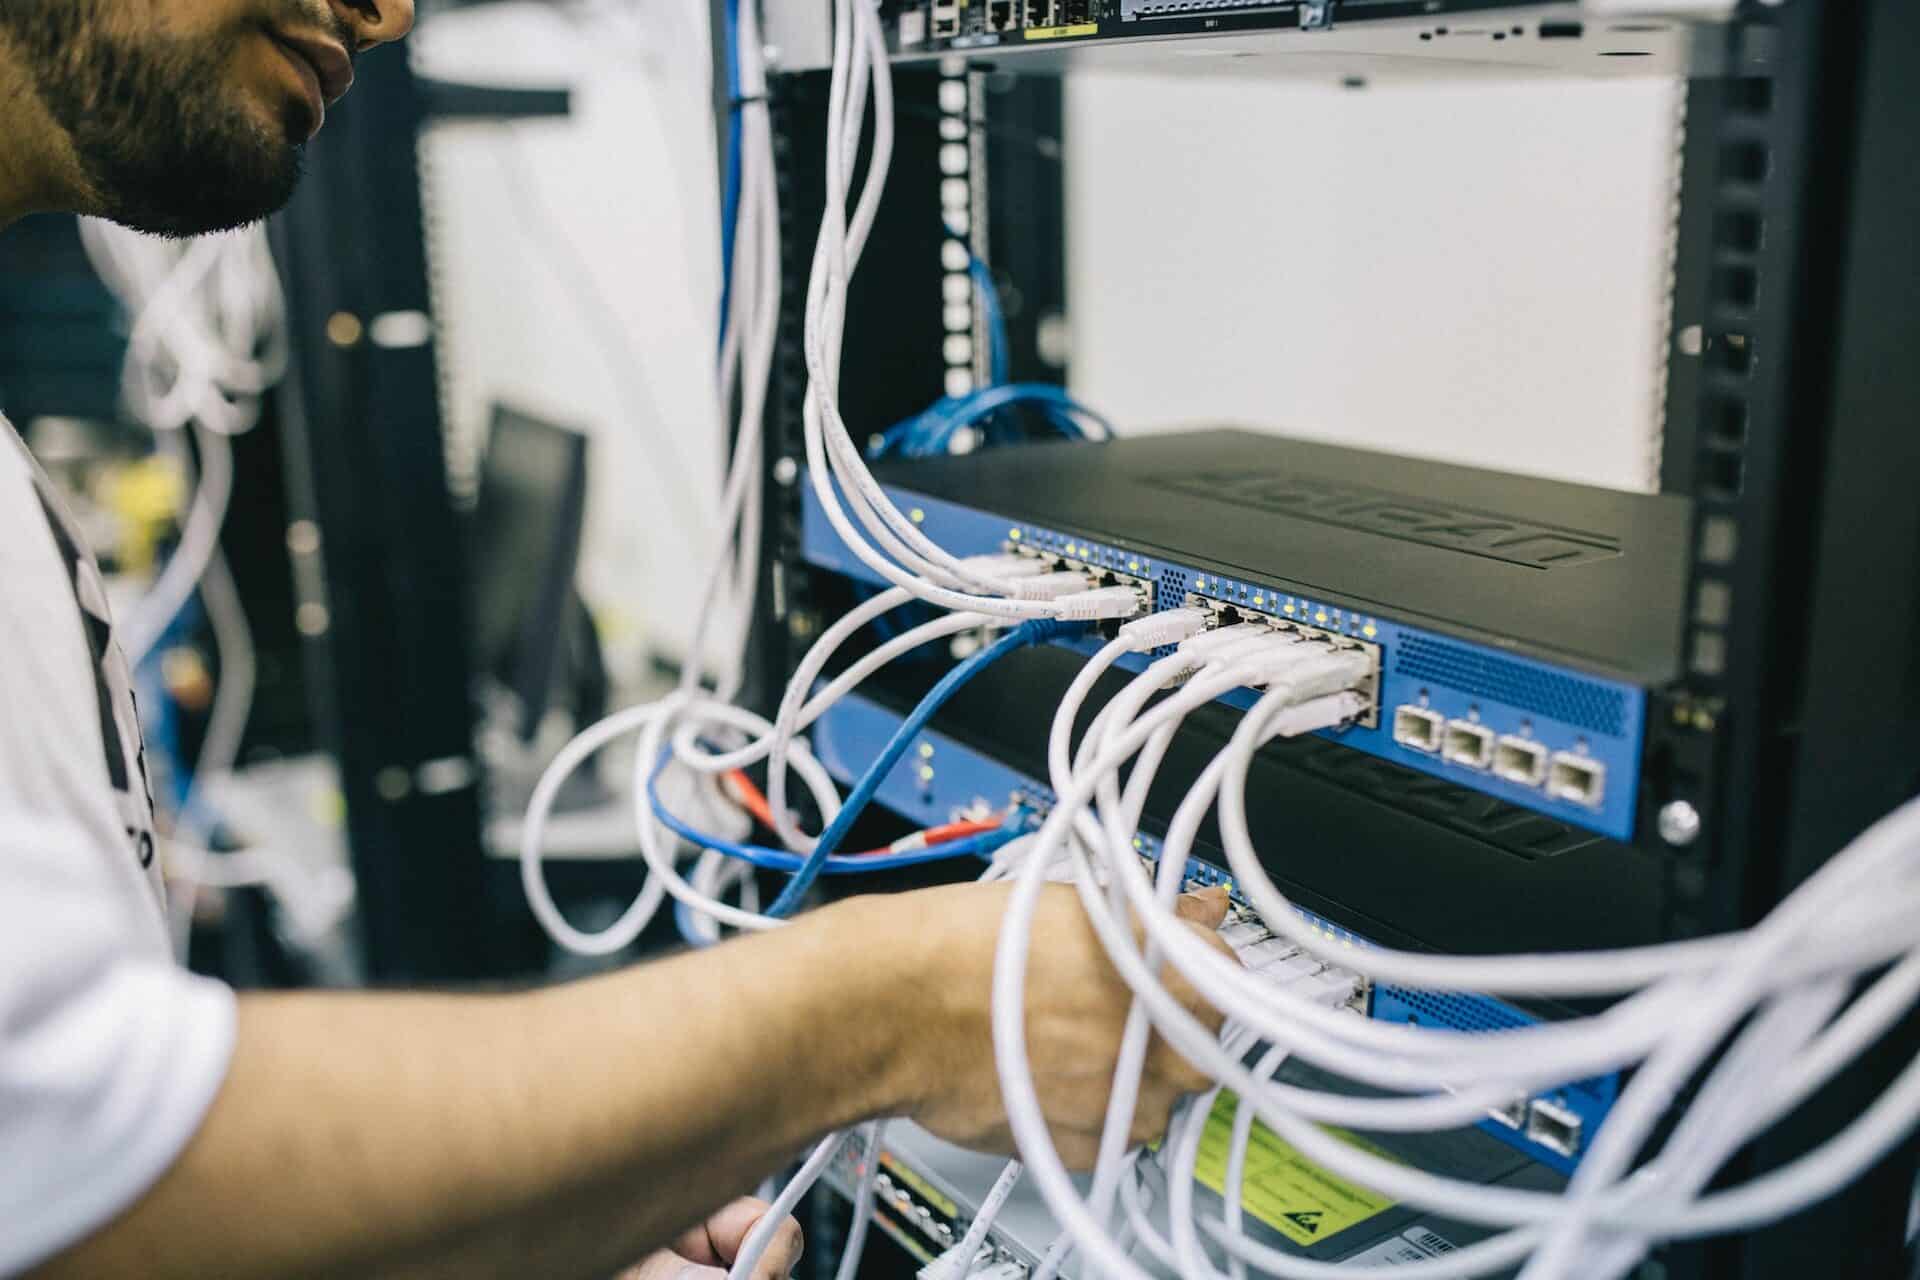 A man plugging Ethernet cords into a network switch in a rack